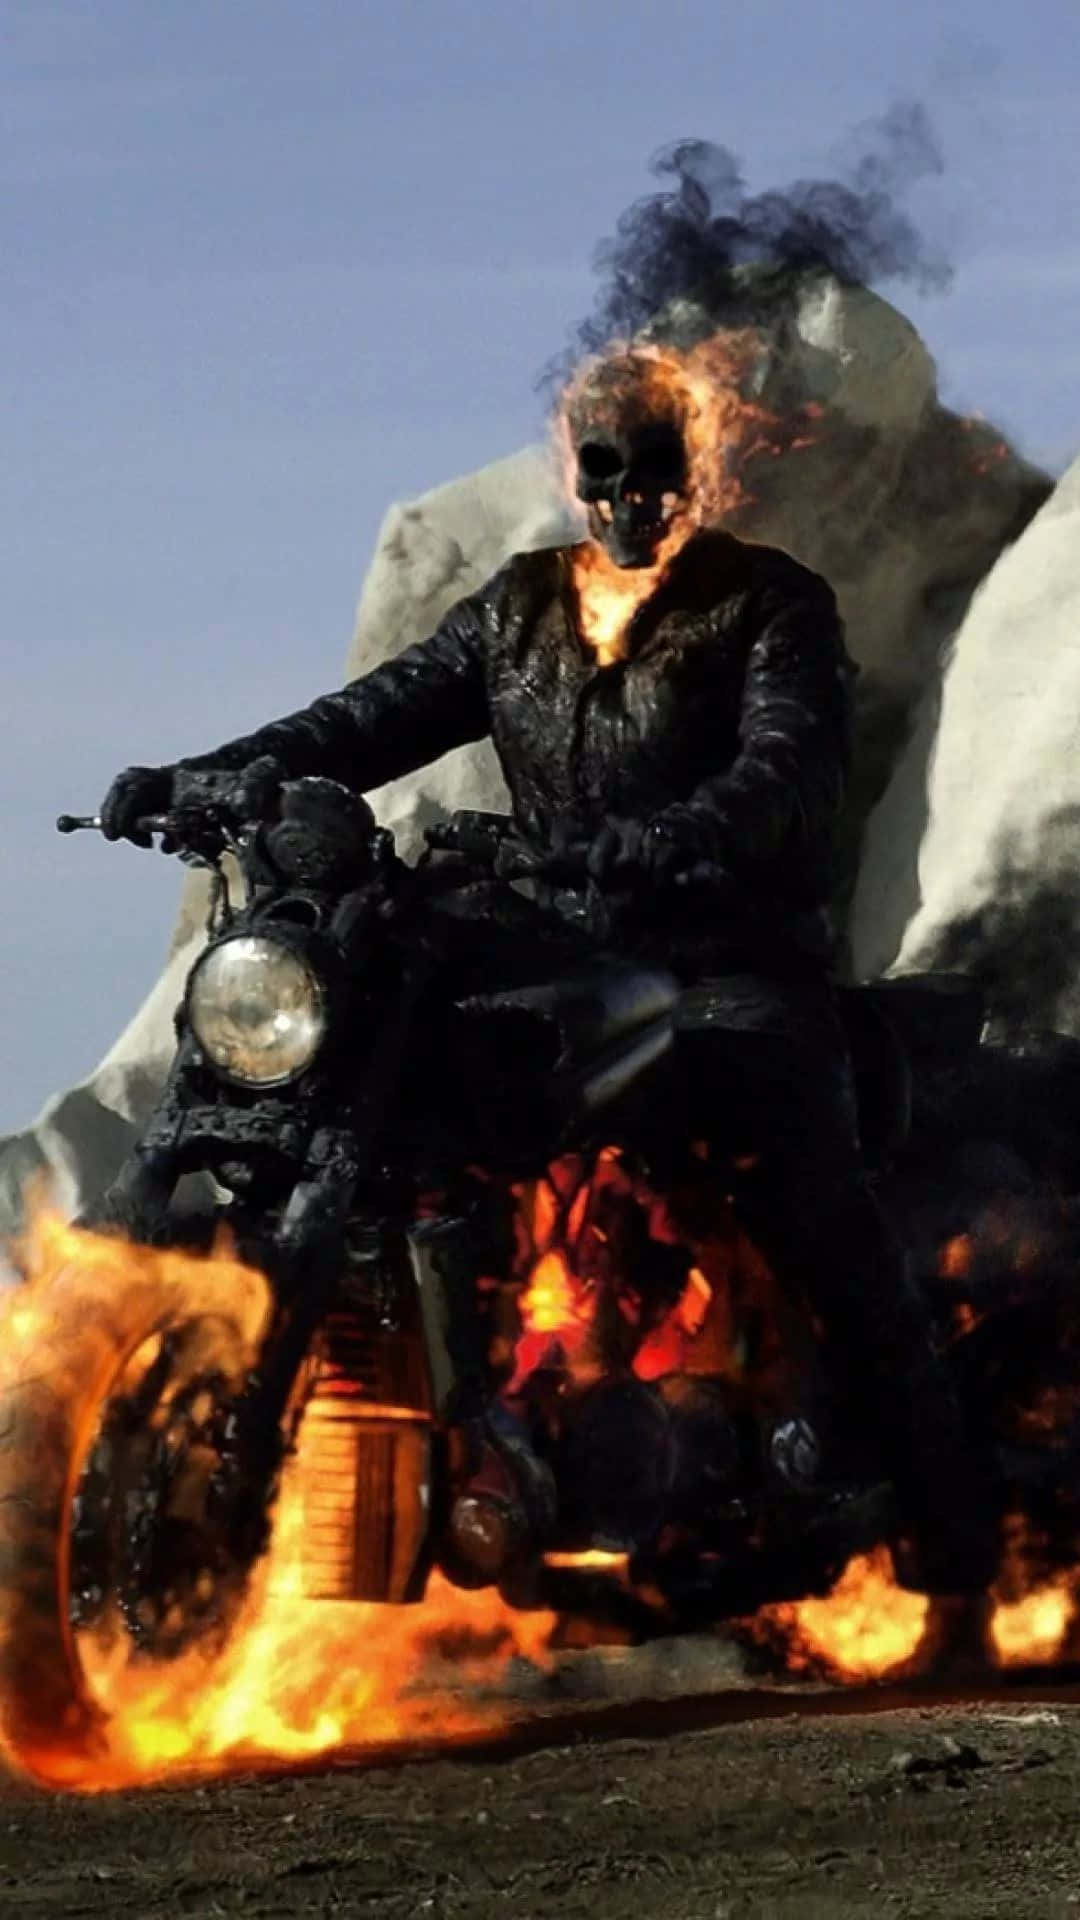 ghost rider bike on fire wallpapers